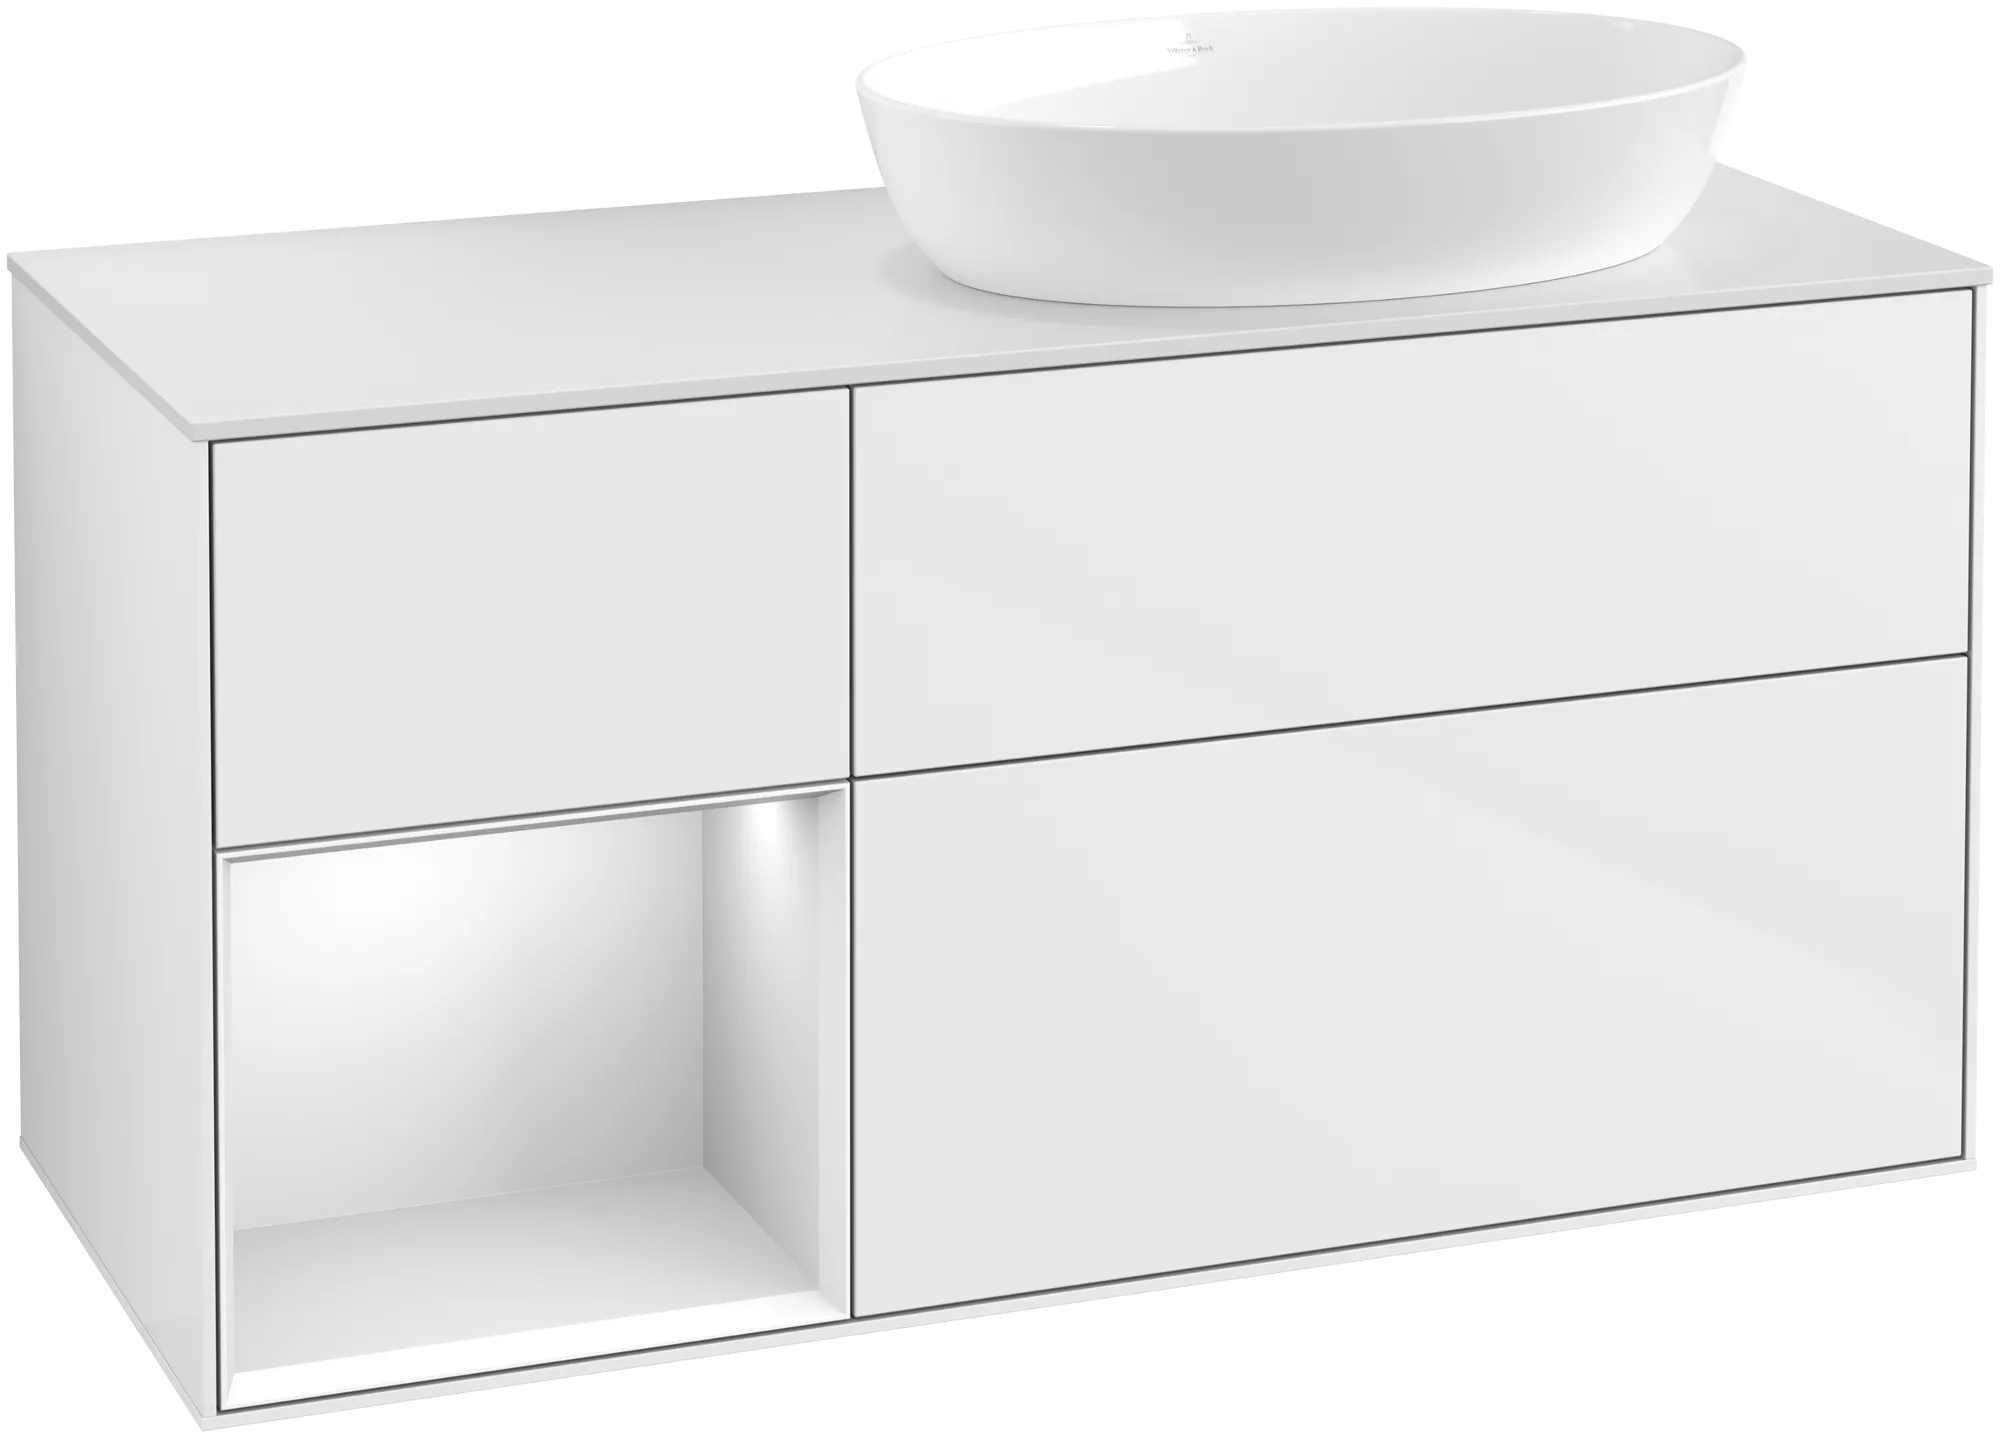 Obrázek VILLEROY BOCH Finion Vanity unit, with lighting, 3 pull-out compartments, 1200 x 603 x 501 mm, Glossy White Lacquer / White Matt Lacquer / Glass White Matt #FA41MTGF